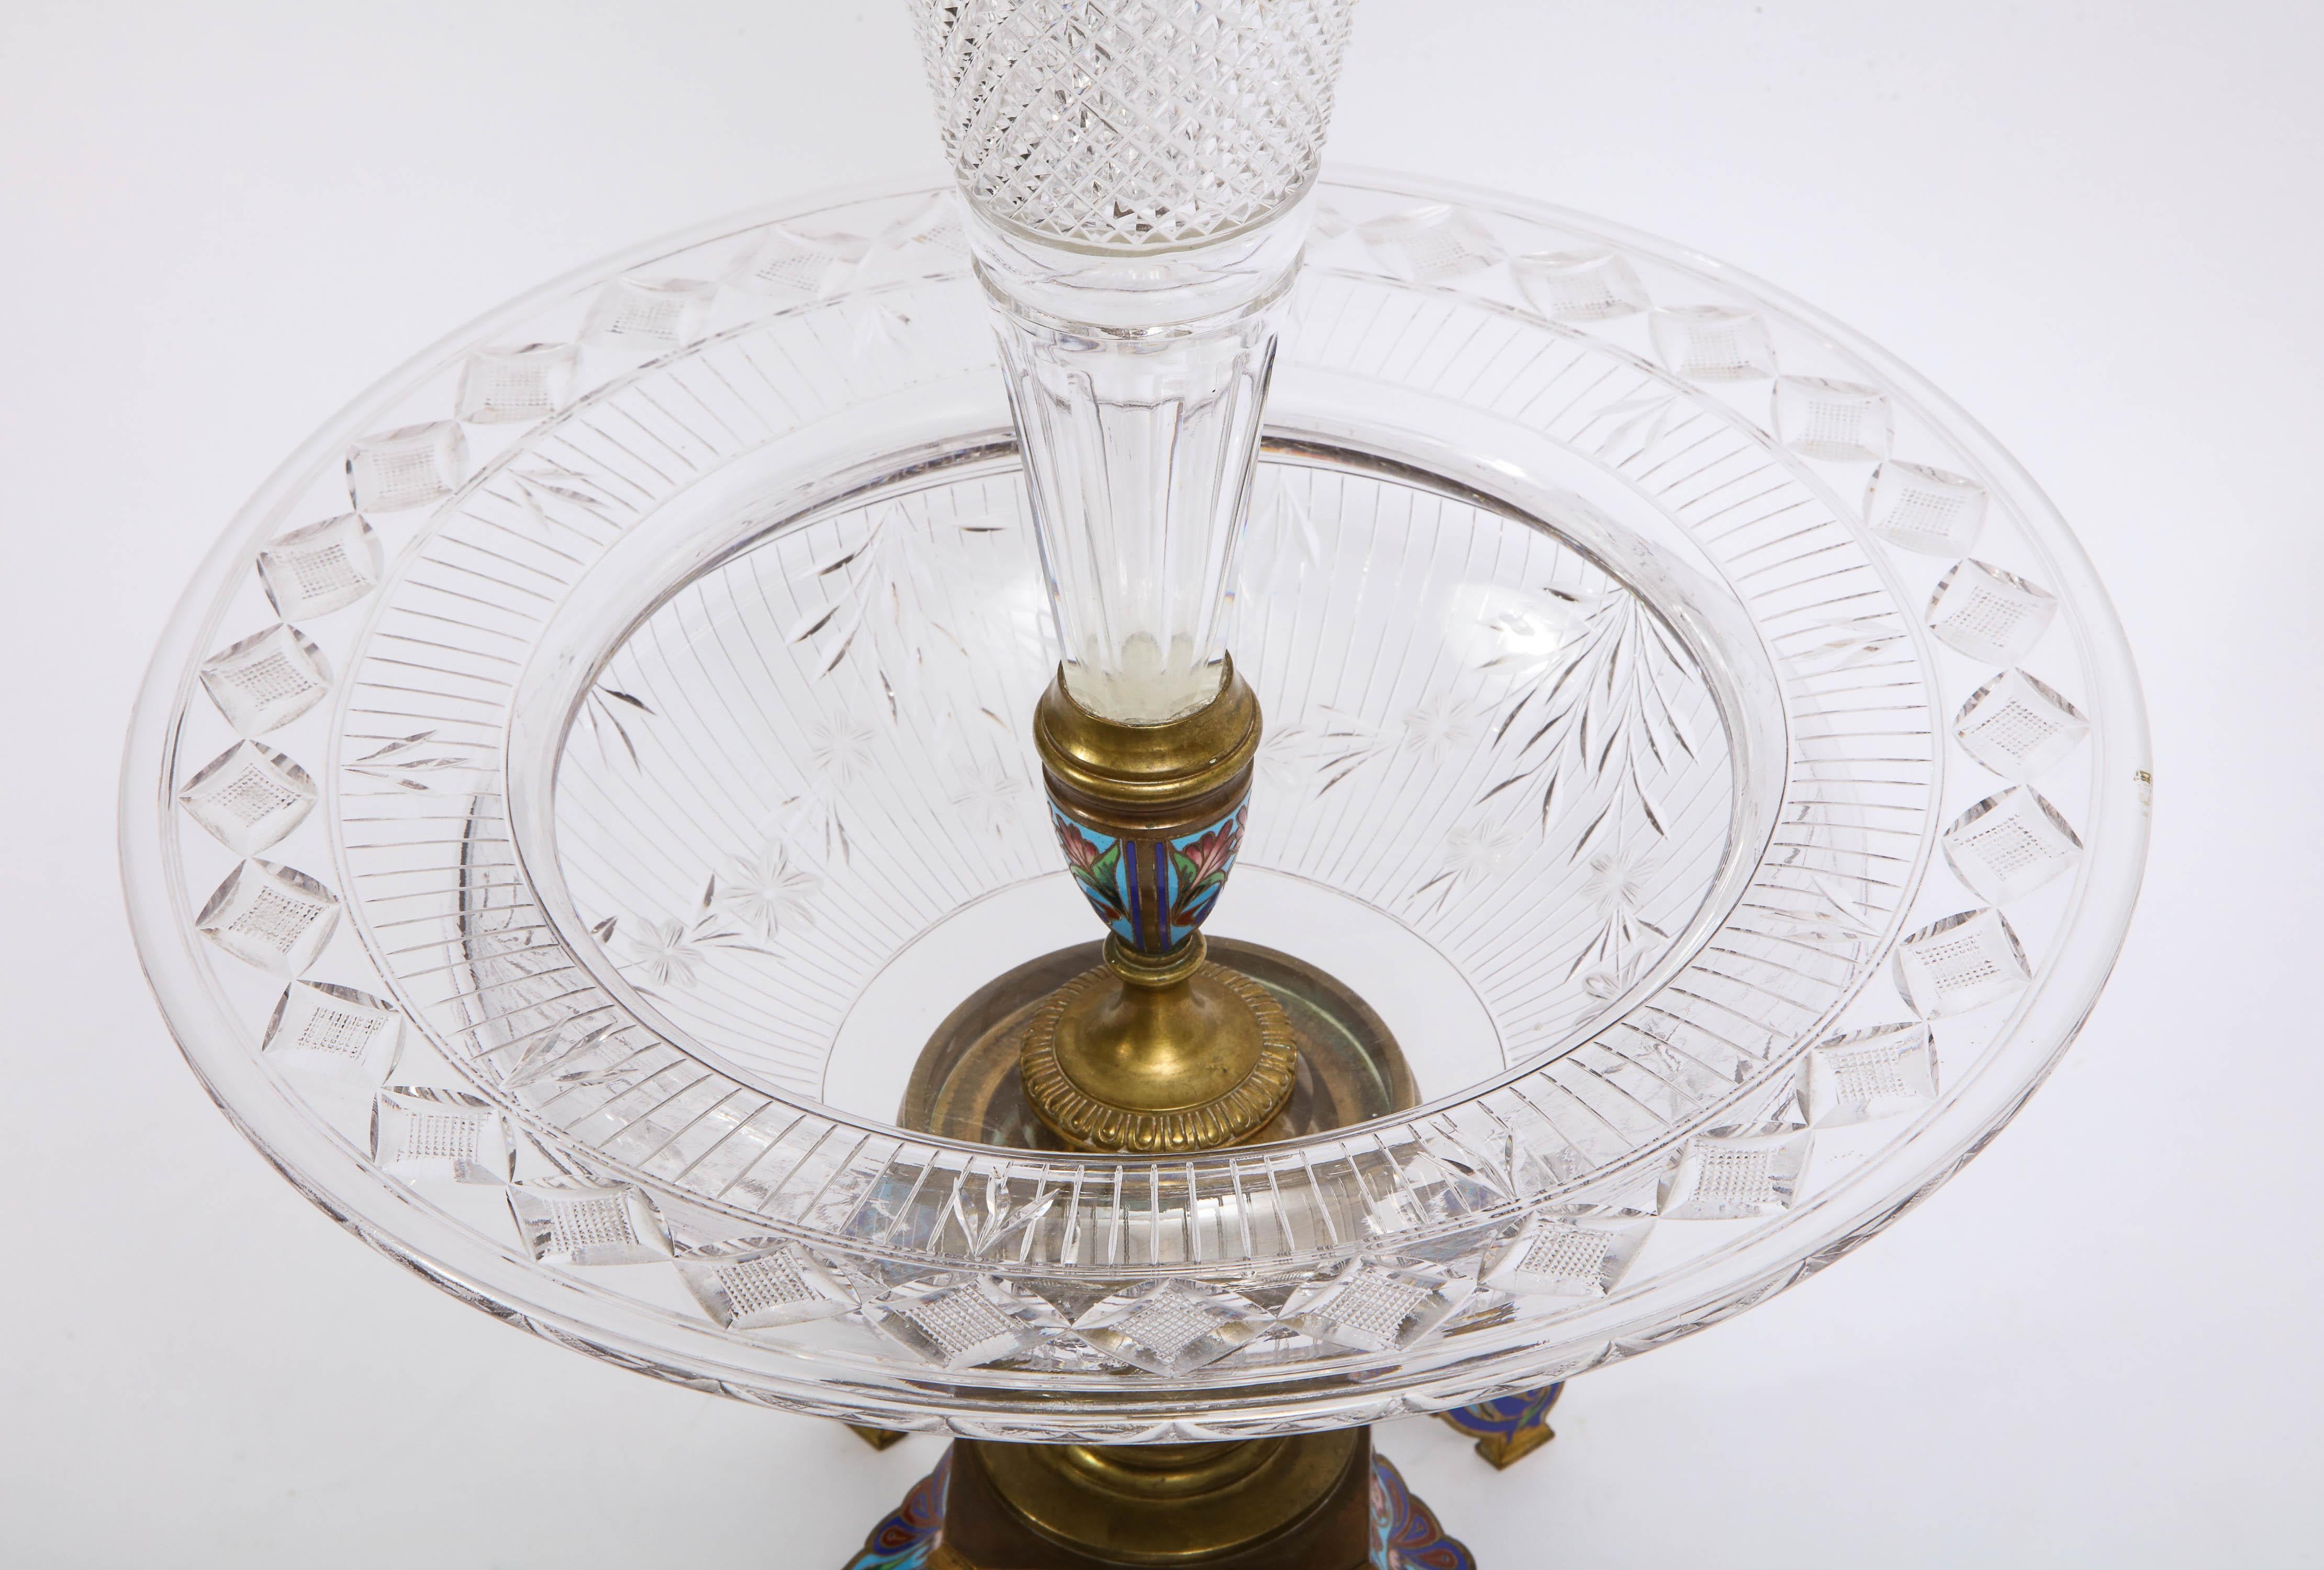 French Hand-Diamond Cut and Champleve Enamel Signed Baccarat Centerpiece/Floral Vase For Sale